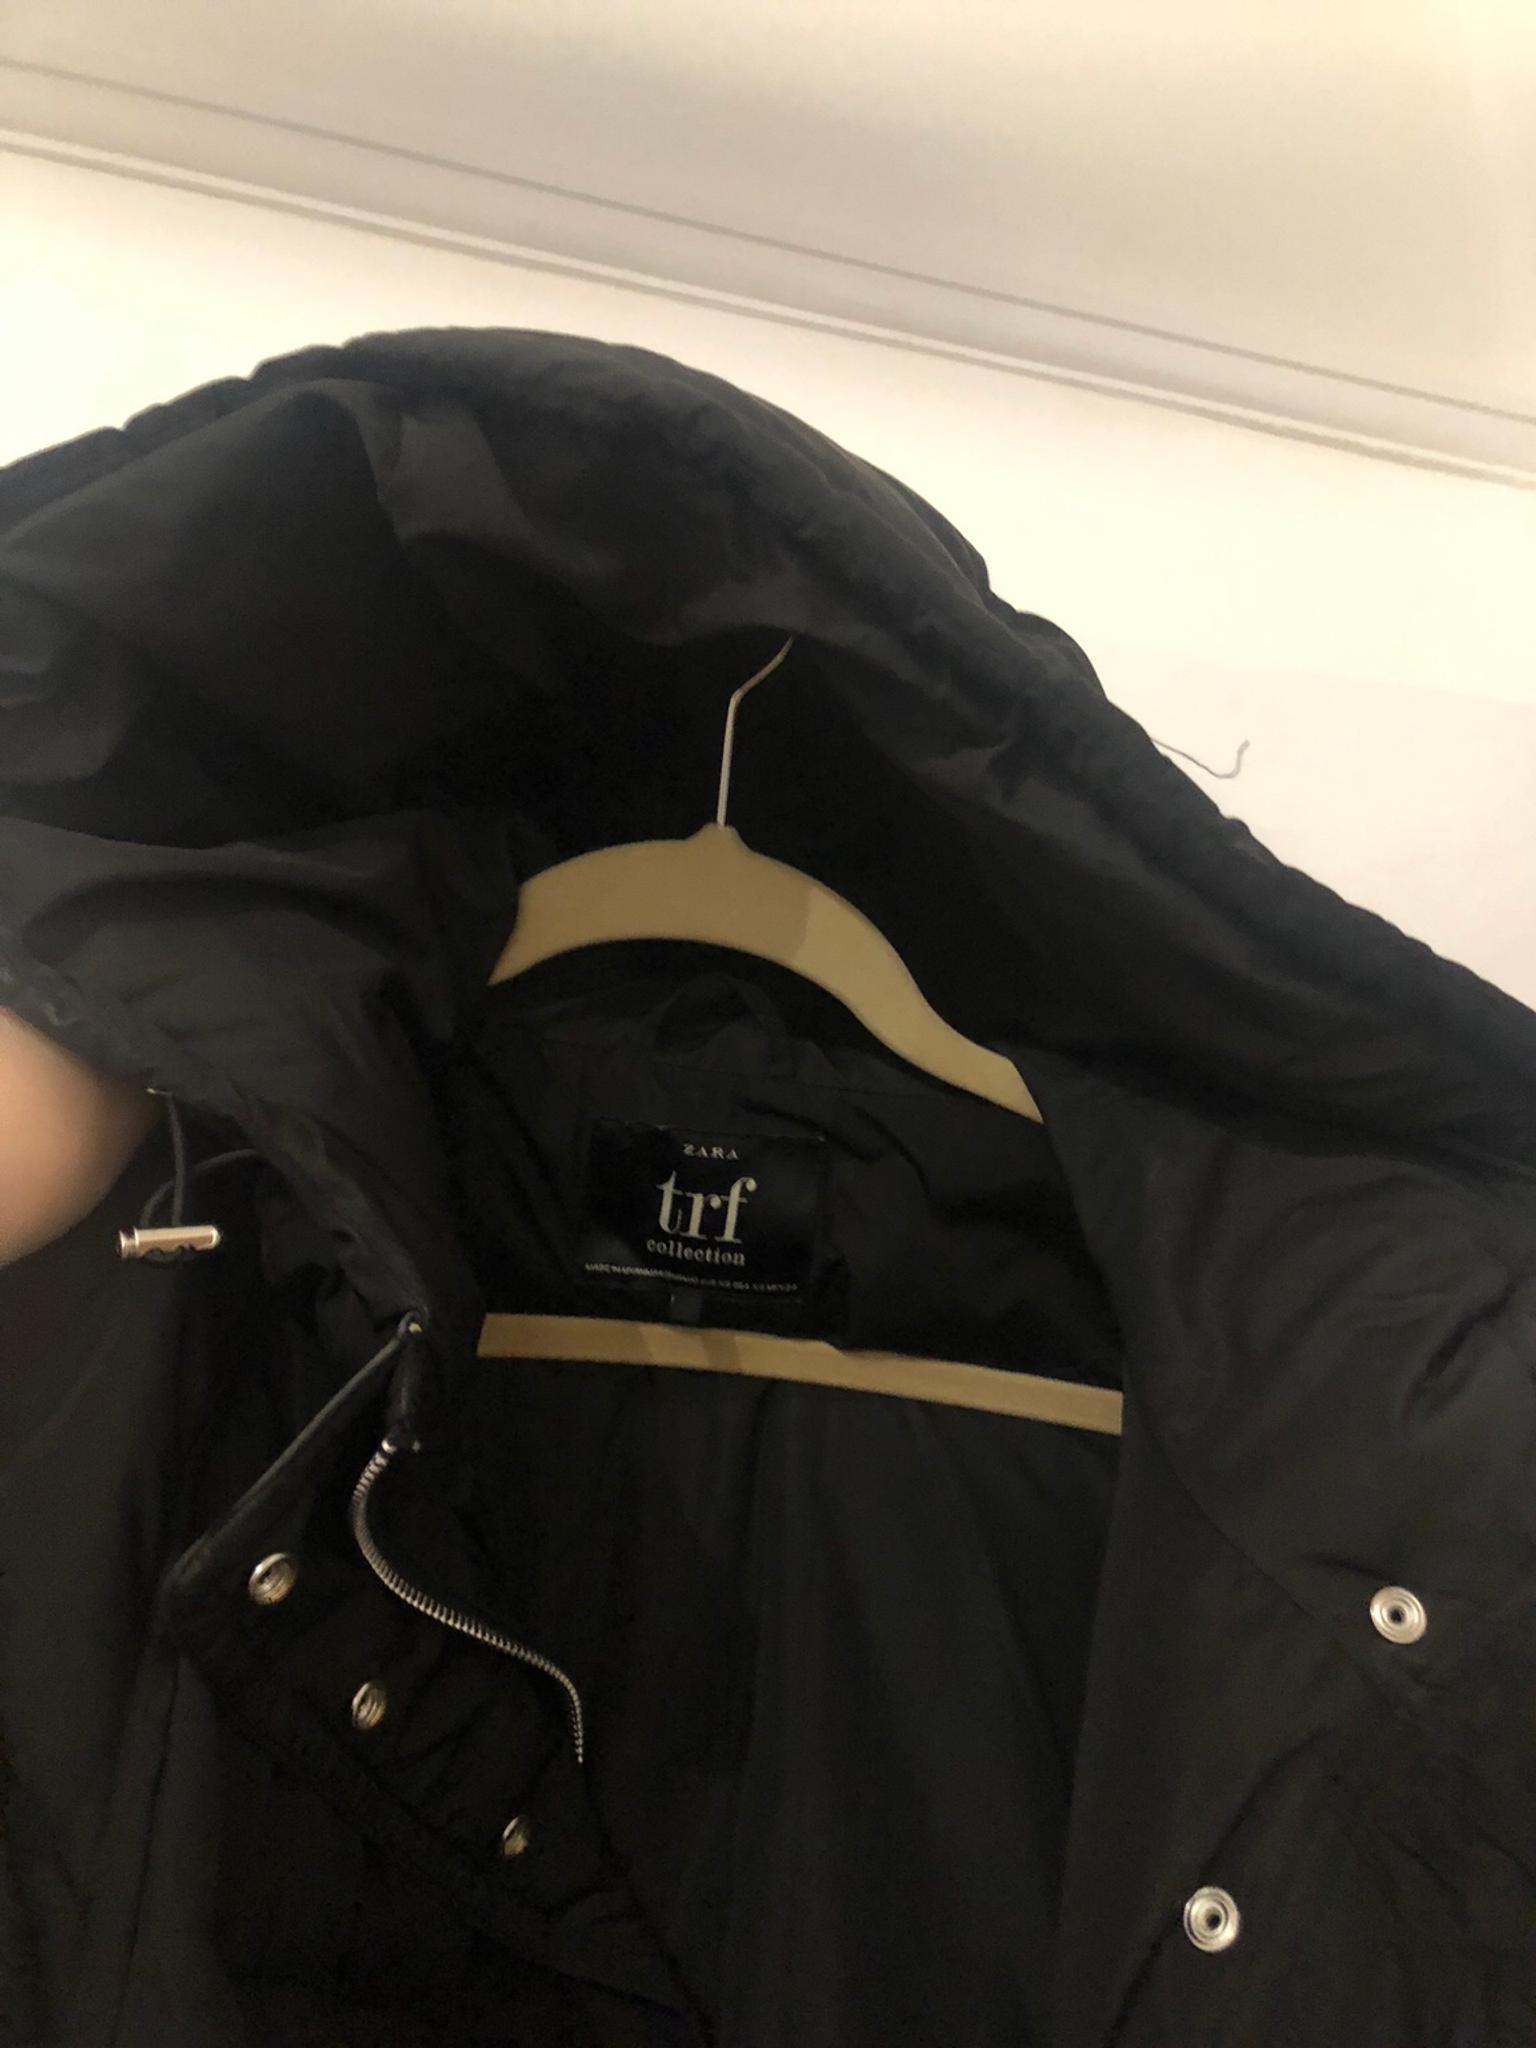 Zara trf collection bomber jacket with 